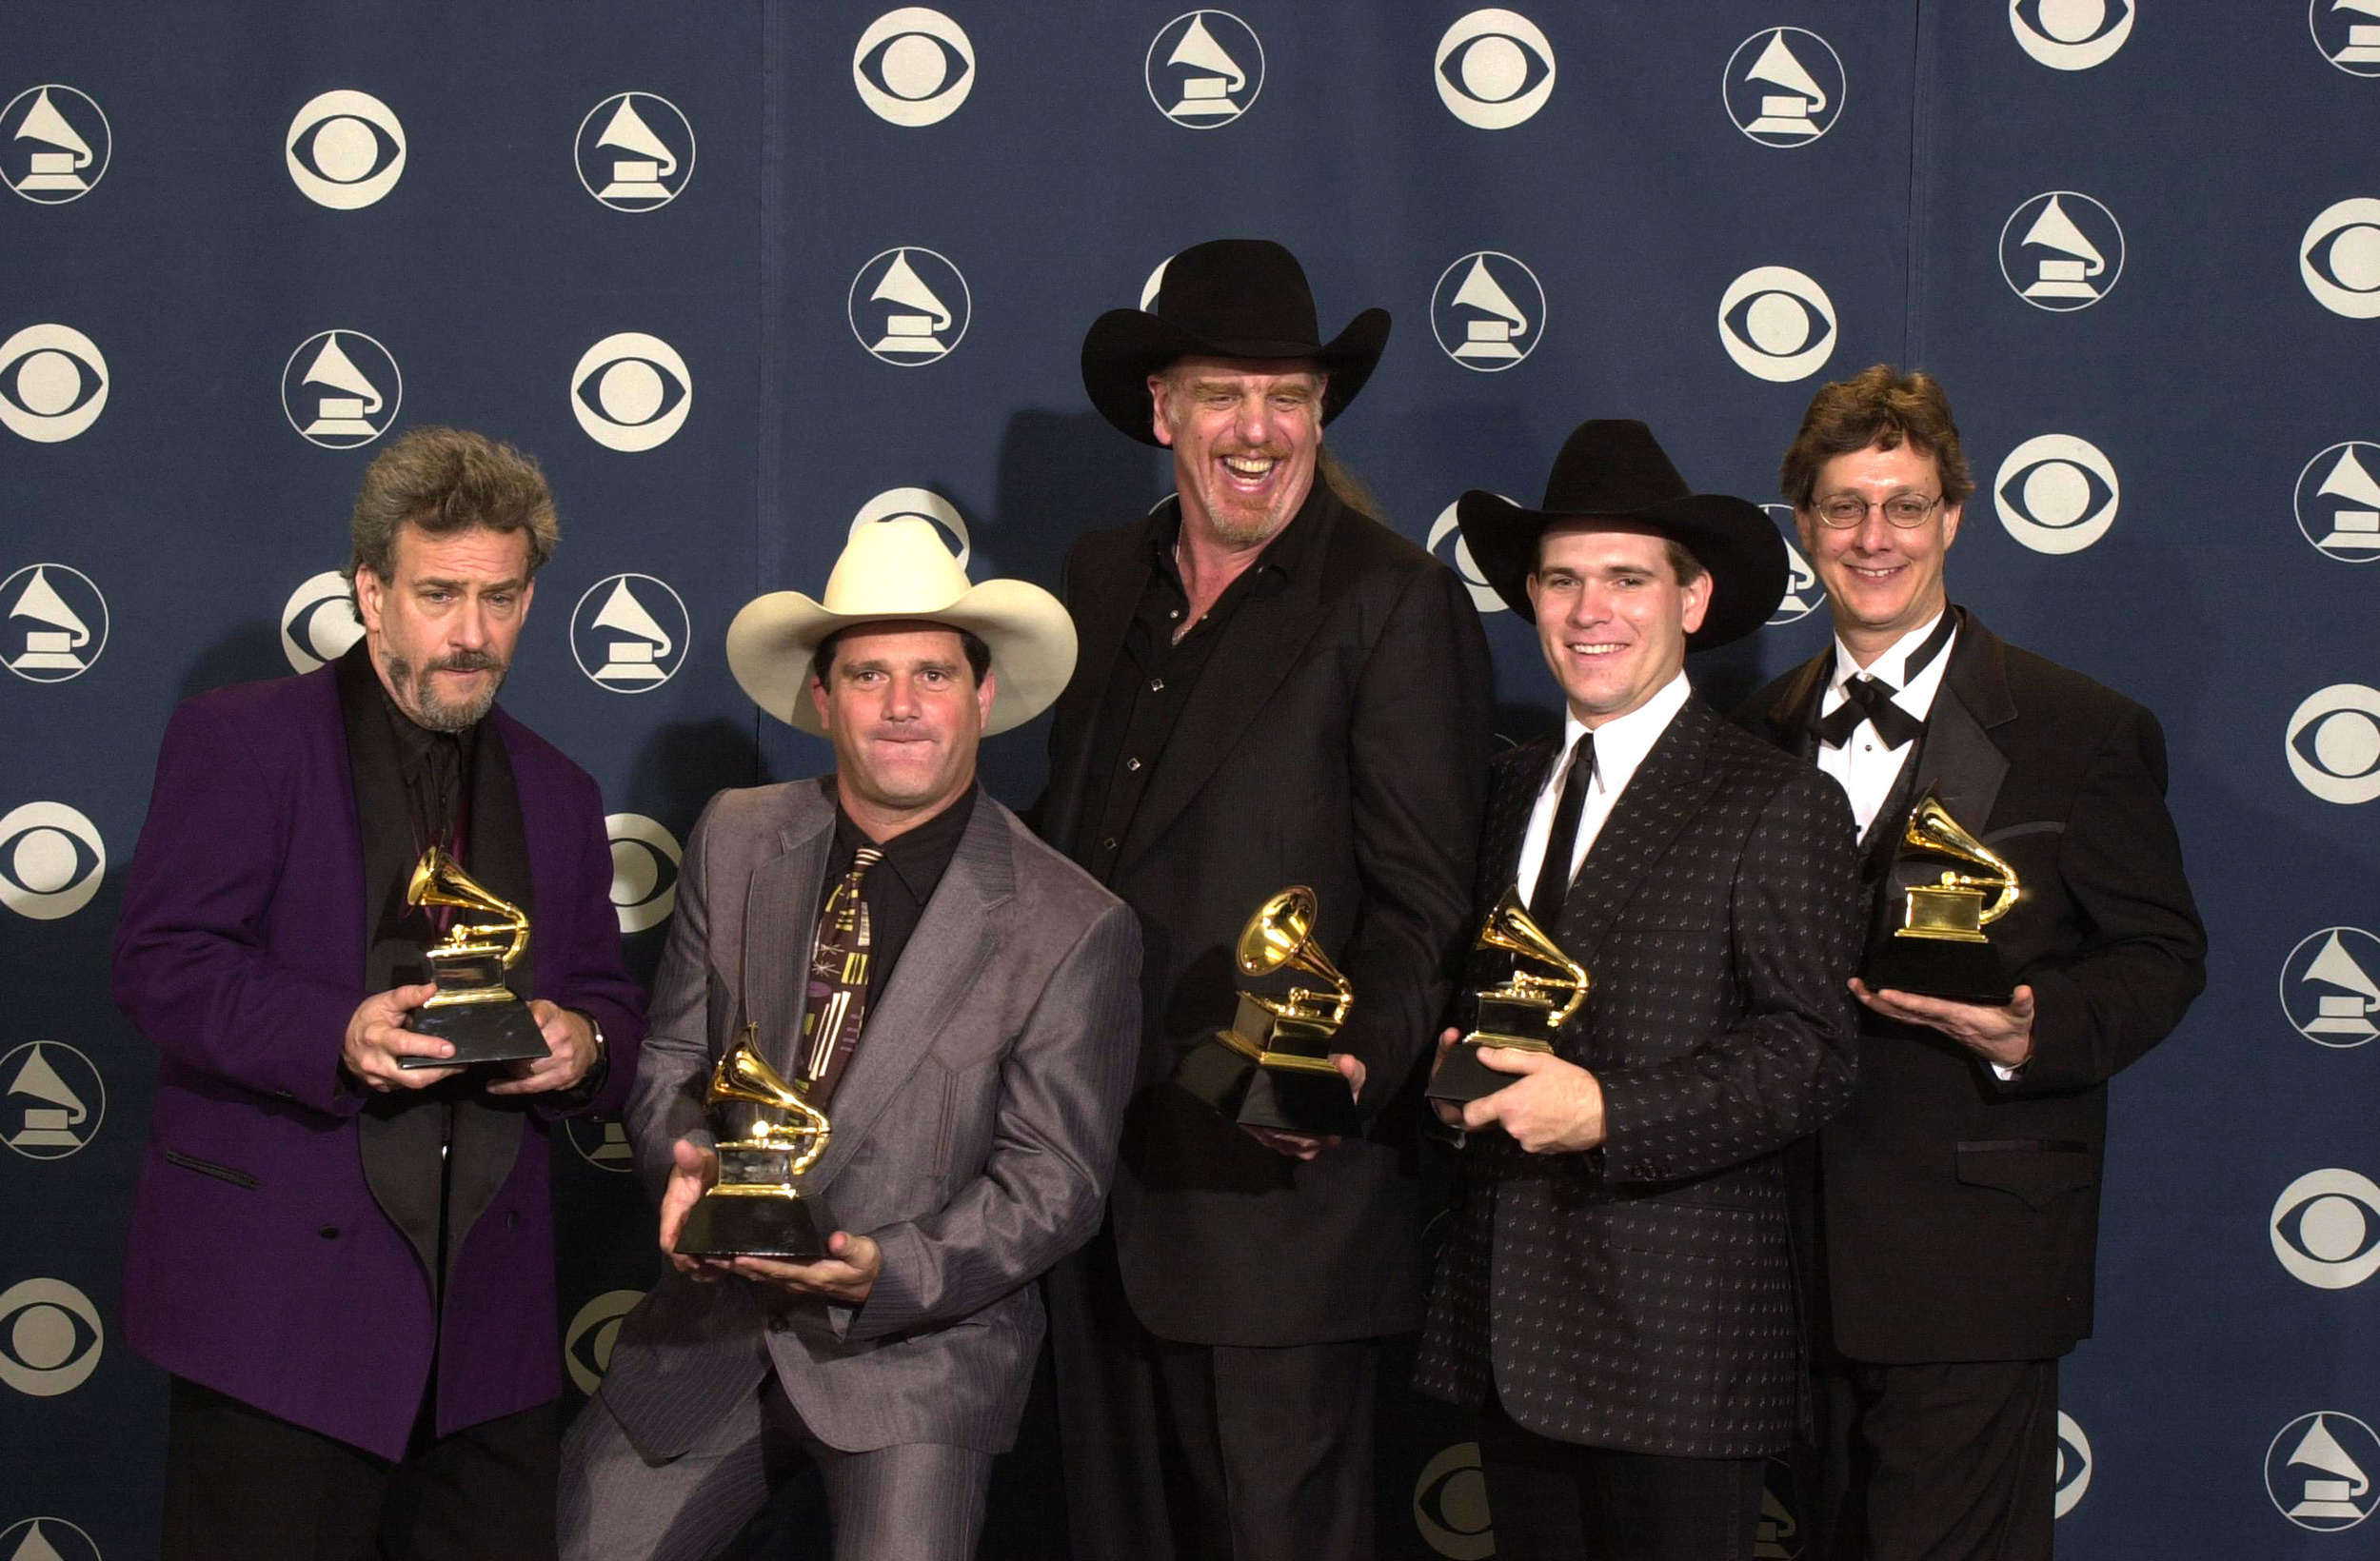 <p>The torchbearers of Western Swing in modern music, Texas-based band Asleep At The Wheel has been a fixture of country music since the 1970s. With fans like Willie Nelson, Emmylou Harris, and George Strait, there’s no reason why they shouldn’t be in the Hall of Fame. </p><p>You may also like: <a href='https://www.yardbarker.com/entertainment/articles/20_films_that_should_have_a_prequel/s1__38606812'>20 films that should have a prequel</a></p>